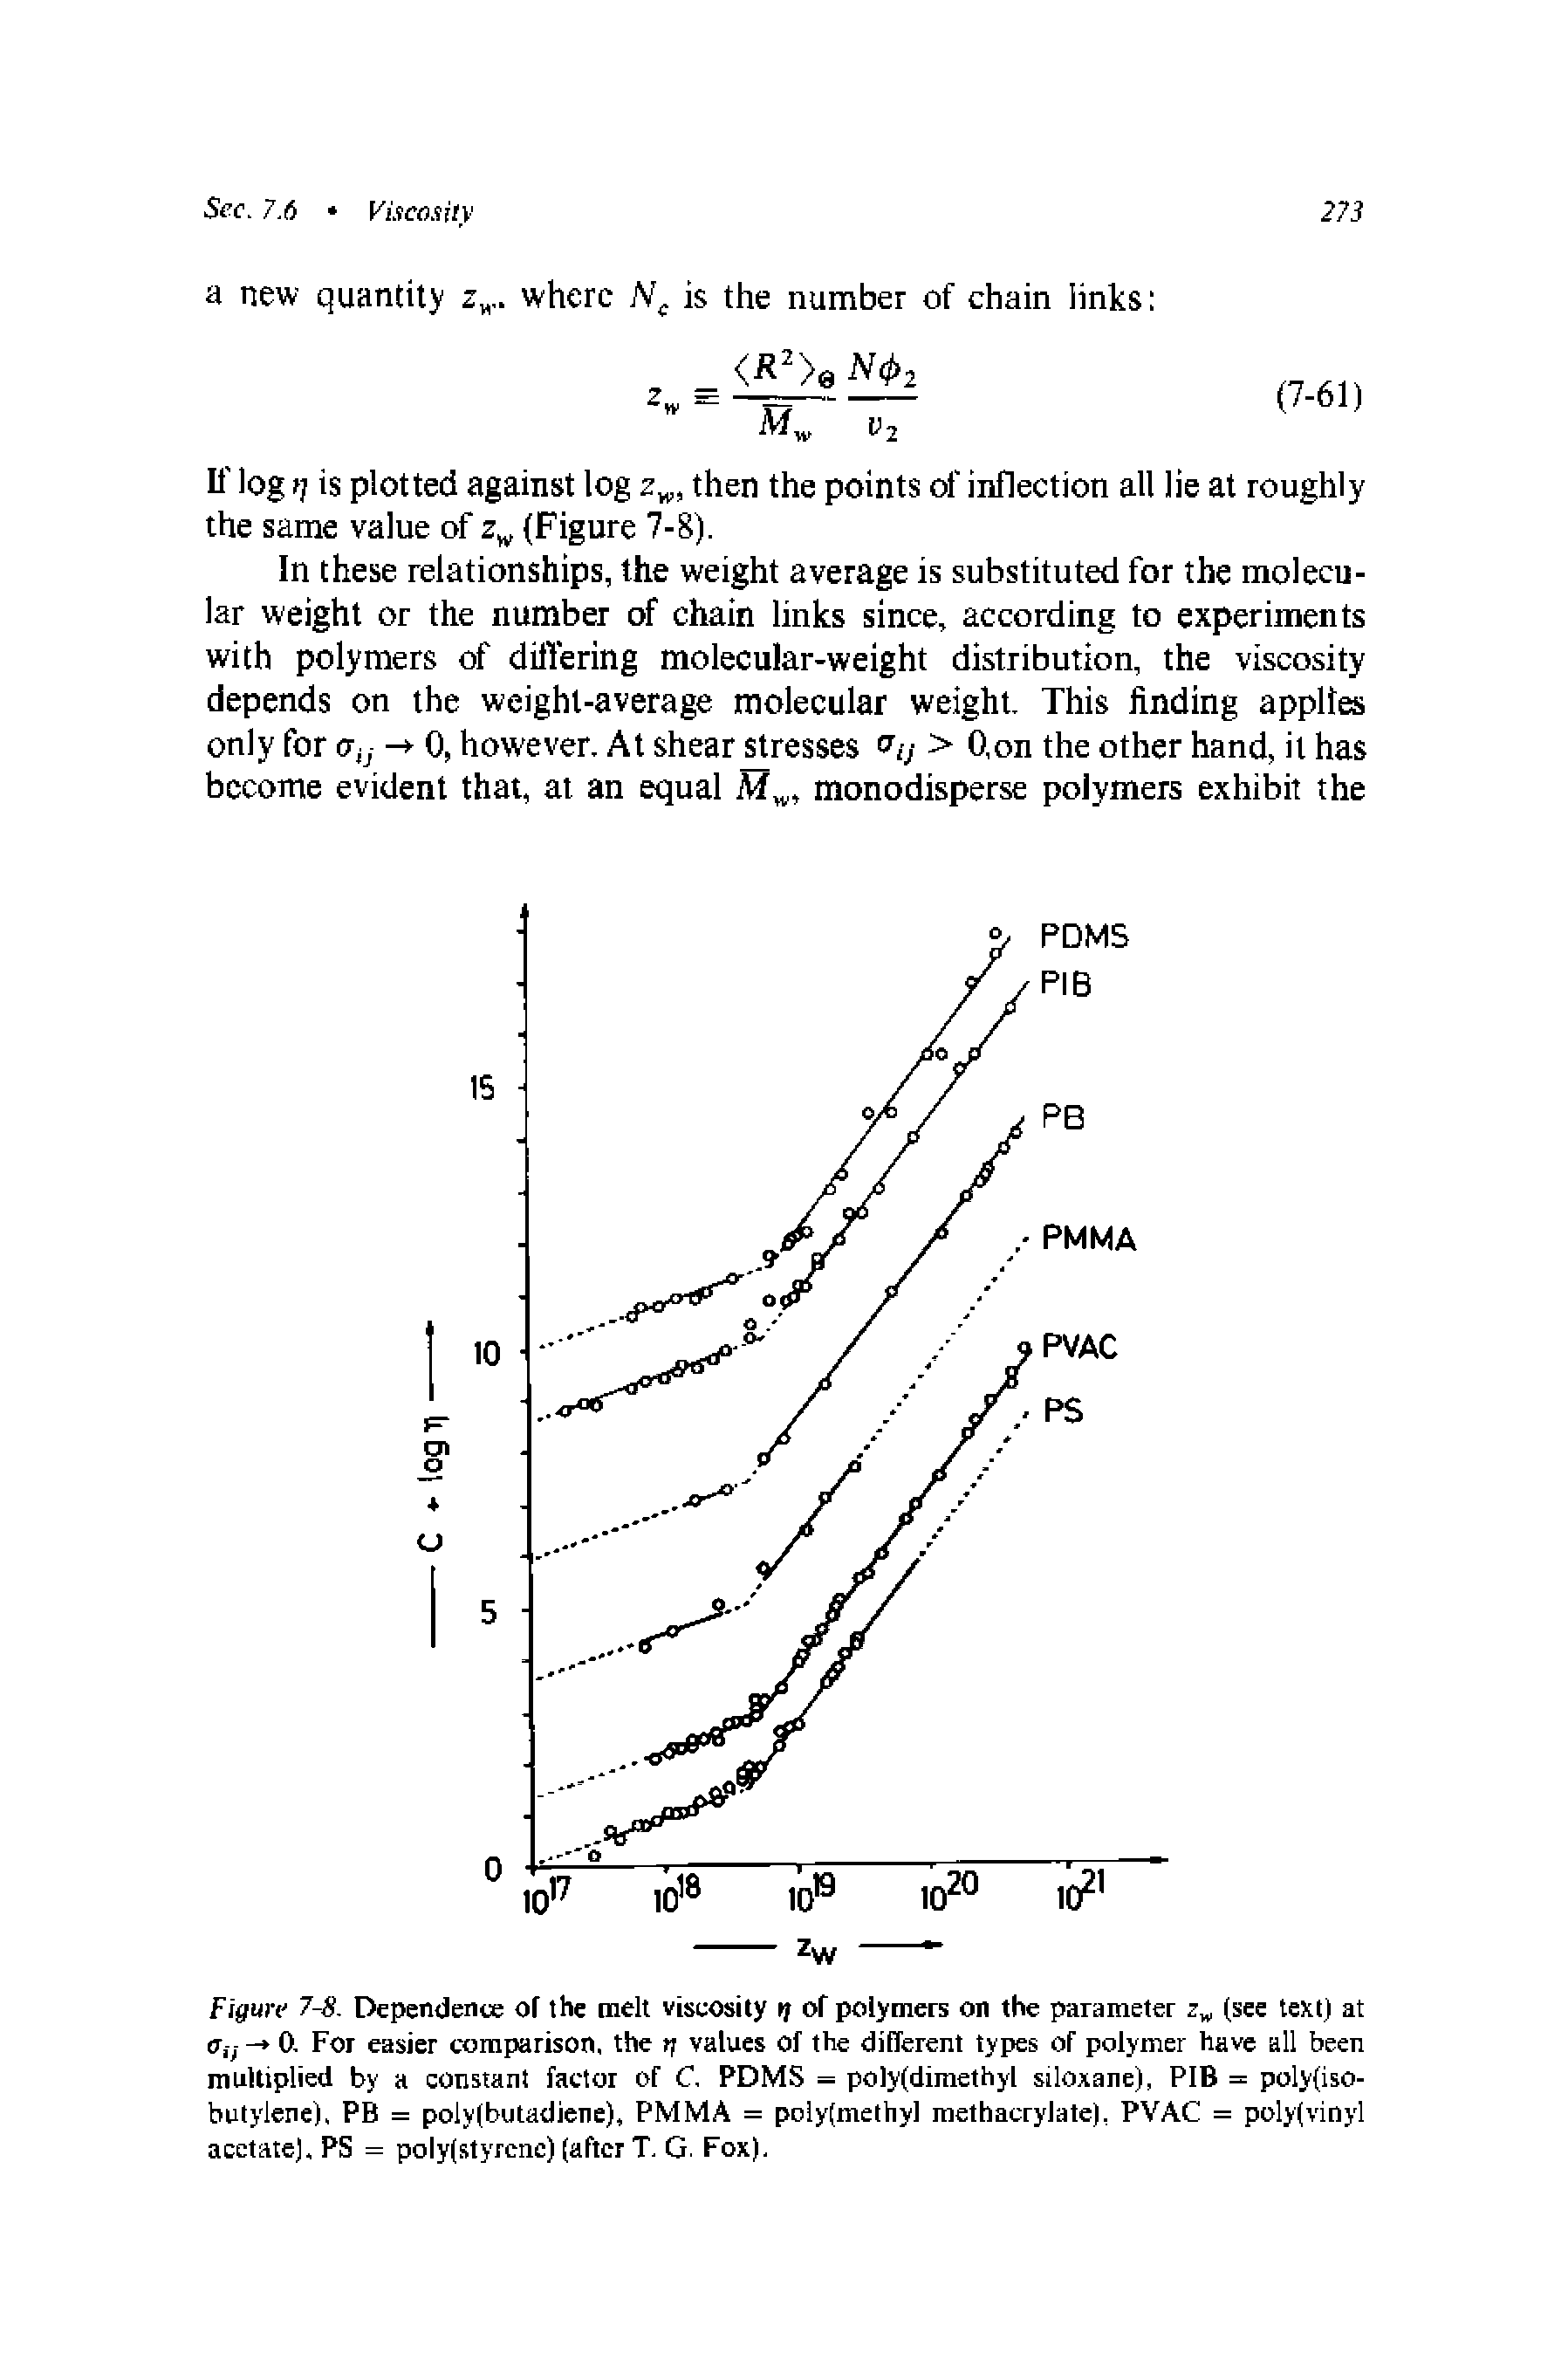 Figure 7-8. Dependents of the melt viscOiiity i of polymers on the parameter z (see text) at - 0. For easier comparison, the if values of the different types of polymer have all been multiplied by a constant factor of C. PDMS = polyfdimethyl siloxane), PIB = poly(iso-butylene). PB = poly(butadiene), PMMA = poly(methyl methacrylate). PVAC = poly(vinyl acetate], PS = polyfstyrene) (after T. G. Fox).